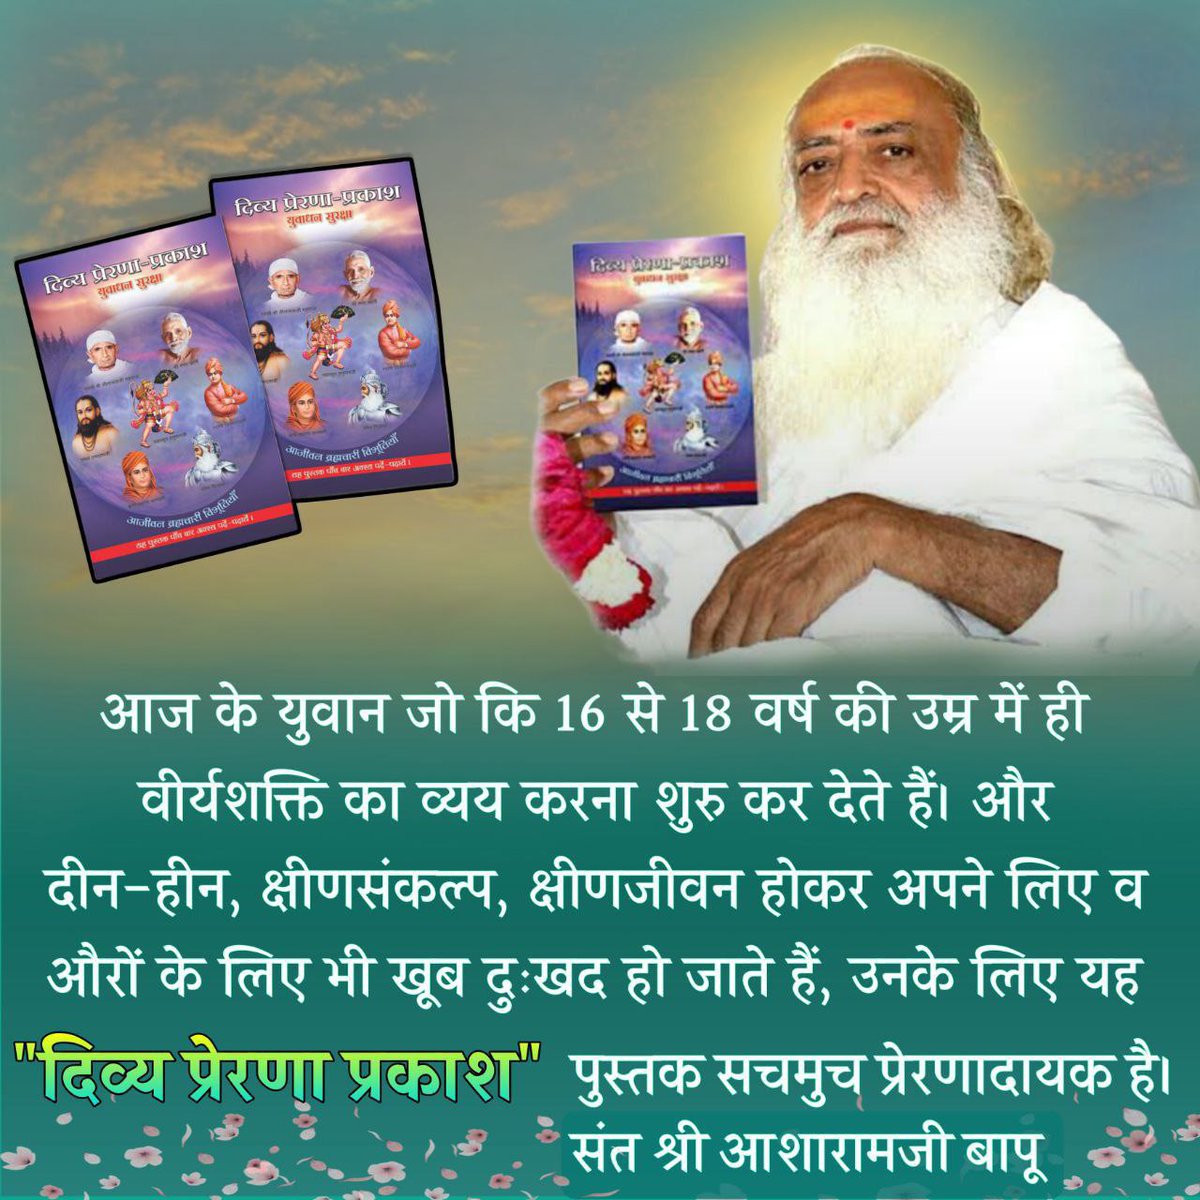 Sant Shri Asharamji Bapu designed a handbook literature named -दिव्य प्रेरणा प्रकाश which focuses on #यौवन_सुरक्षा
In this era of early sexual maturity & lot of diversions, this book is really helpful to save our celibacy, with Vedic mantra, ayuervedic methods & yoga.